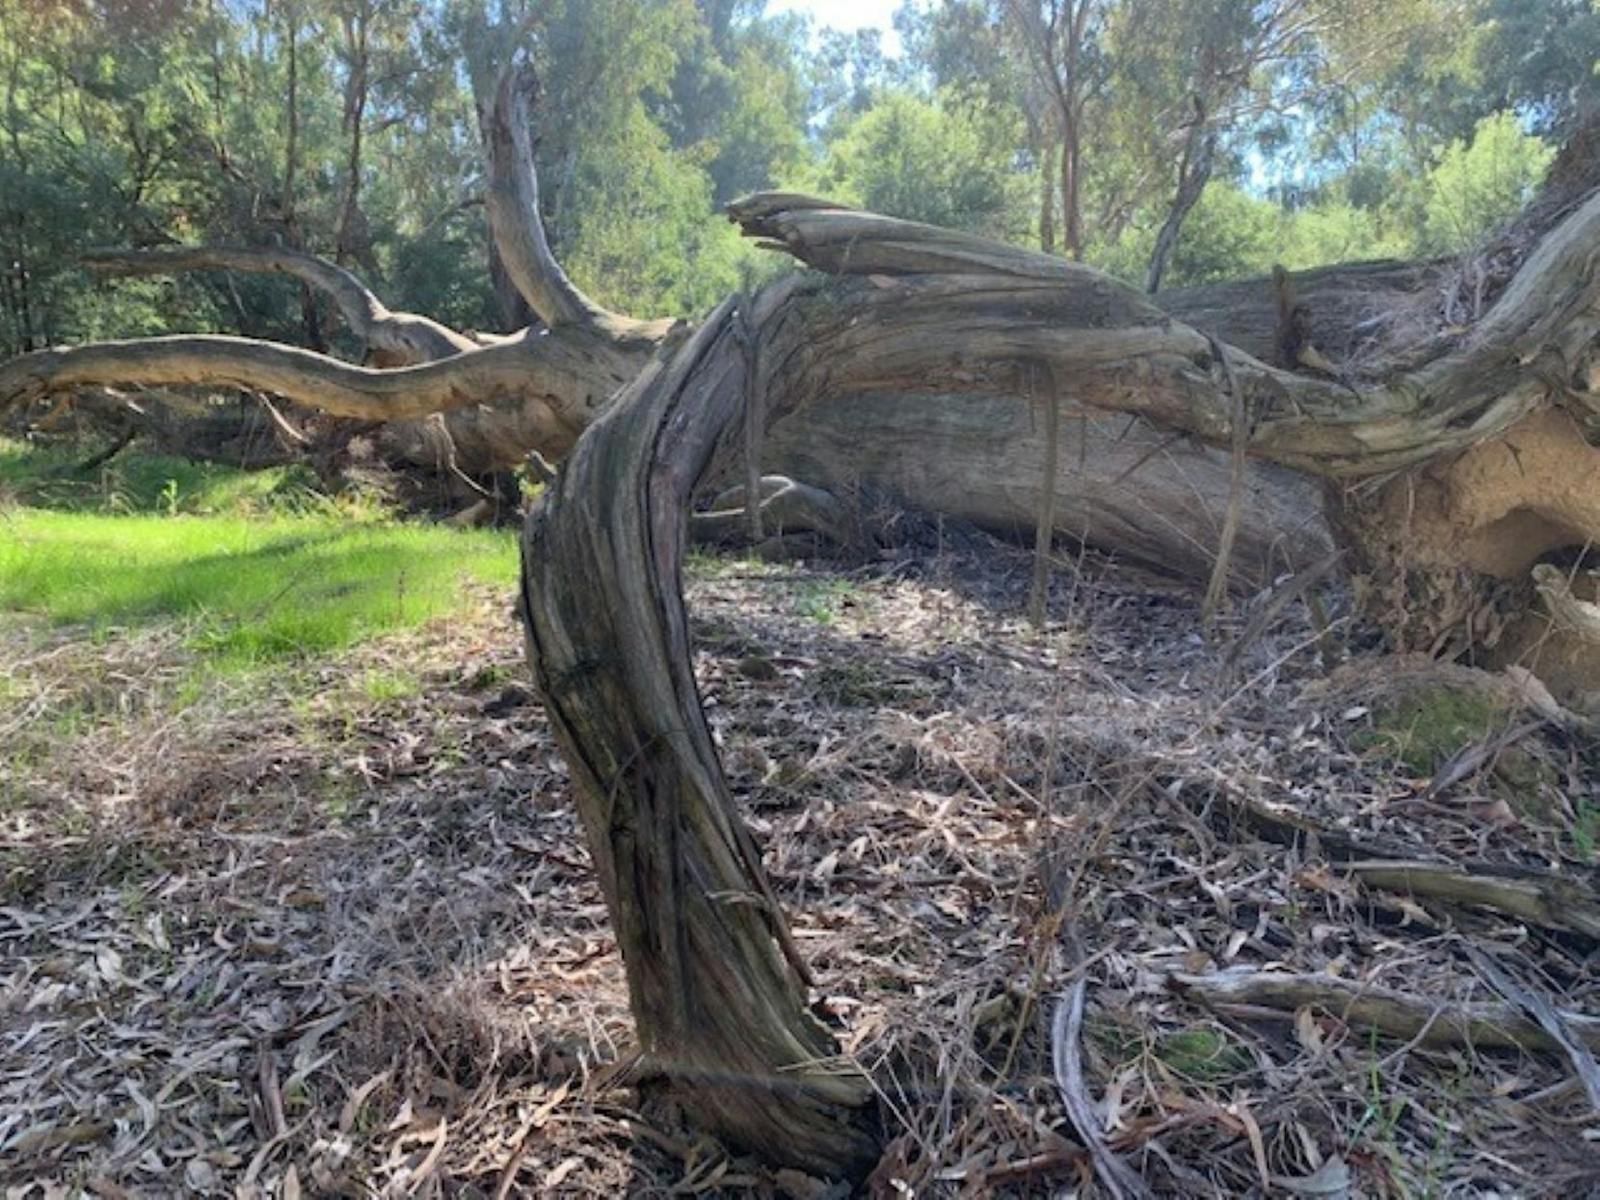 Fallen gum tree, grass, sunlight dried leaves, bark, branch curled down to ground